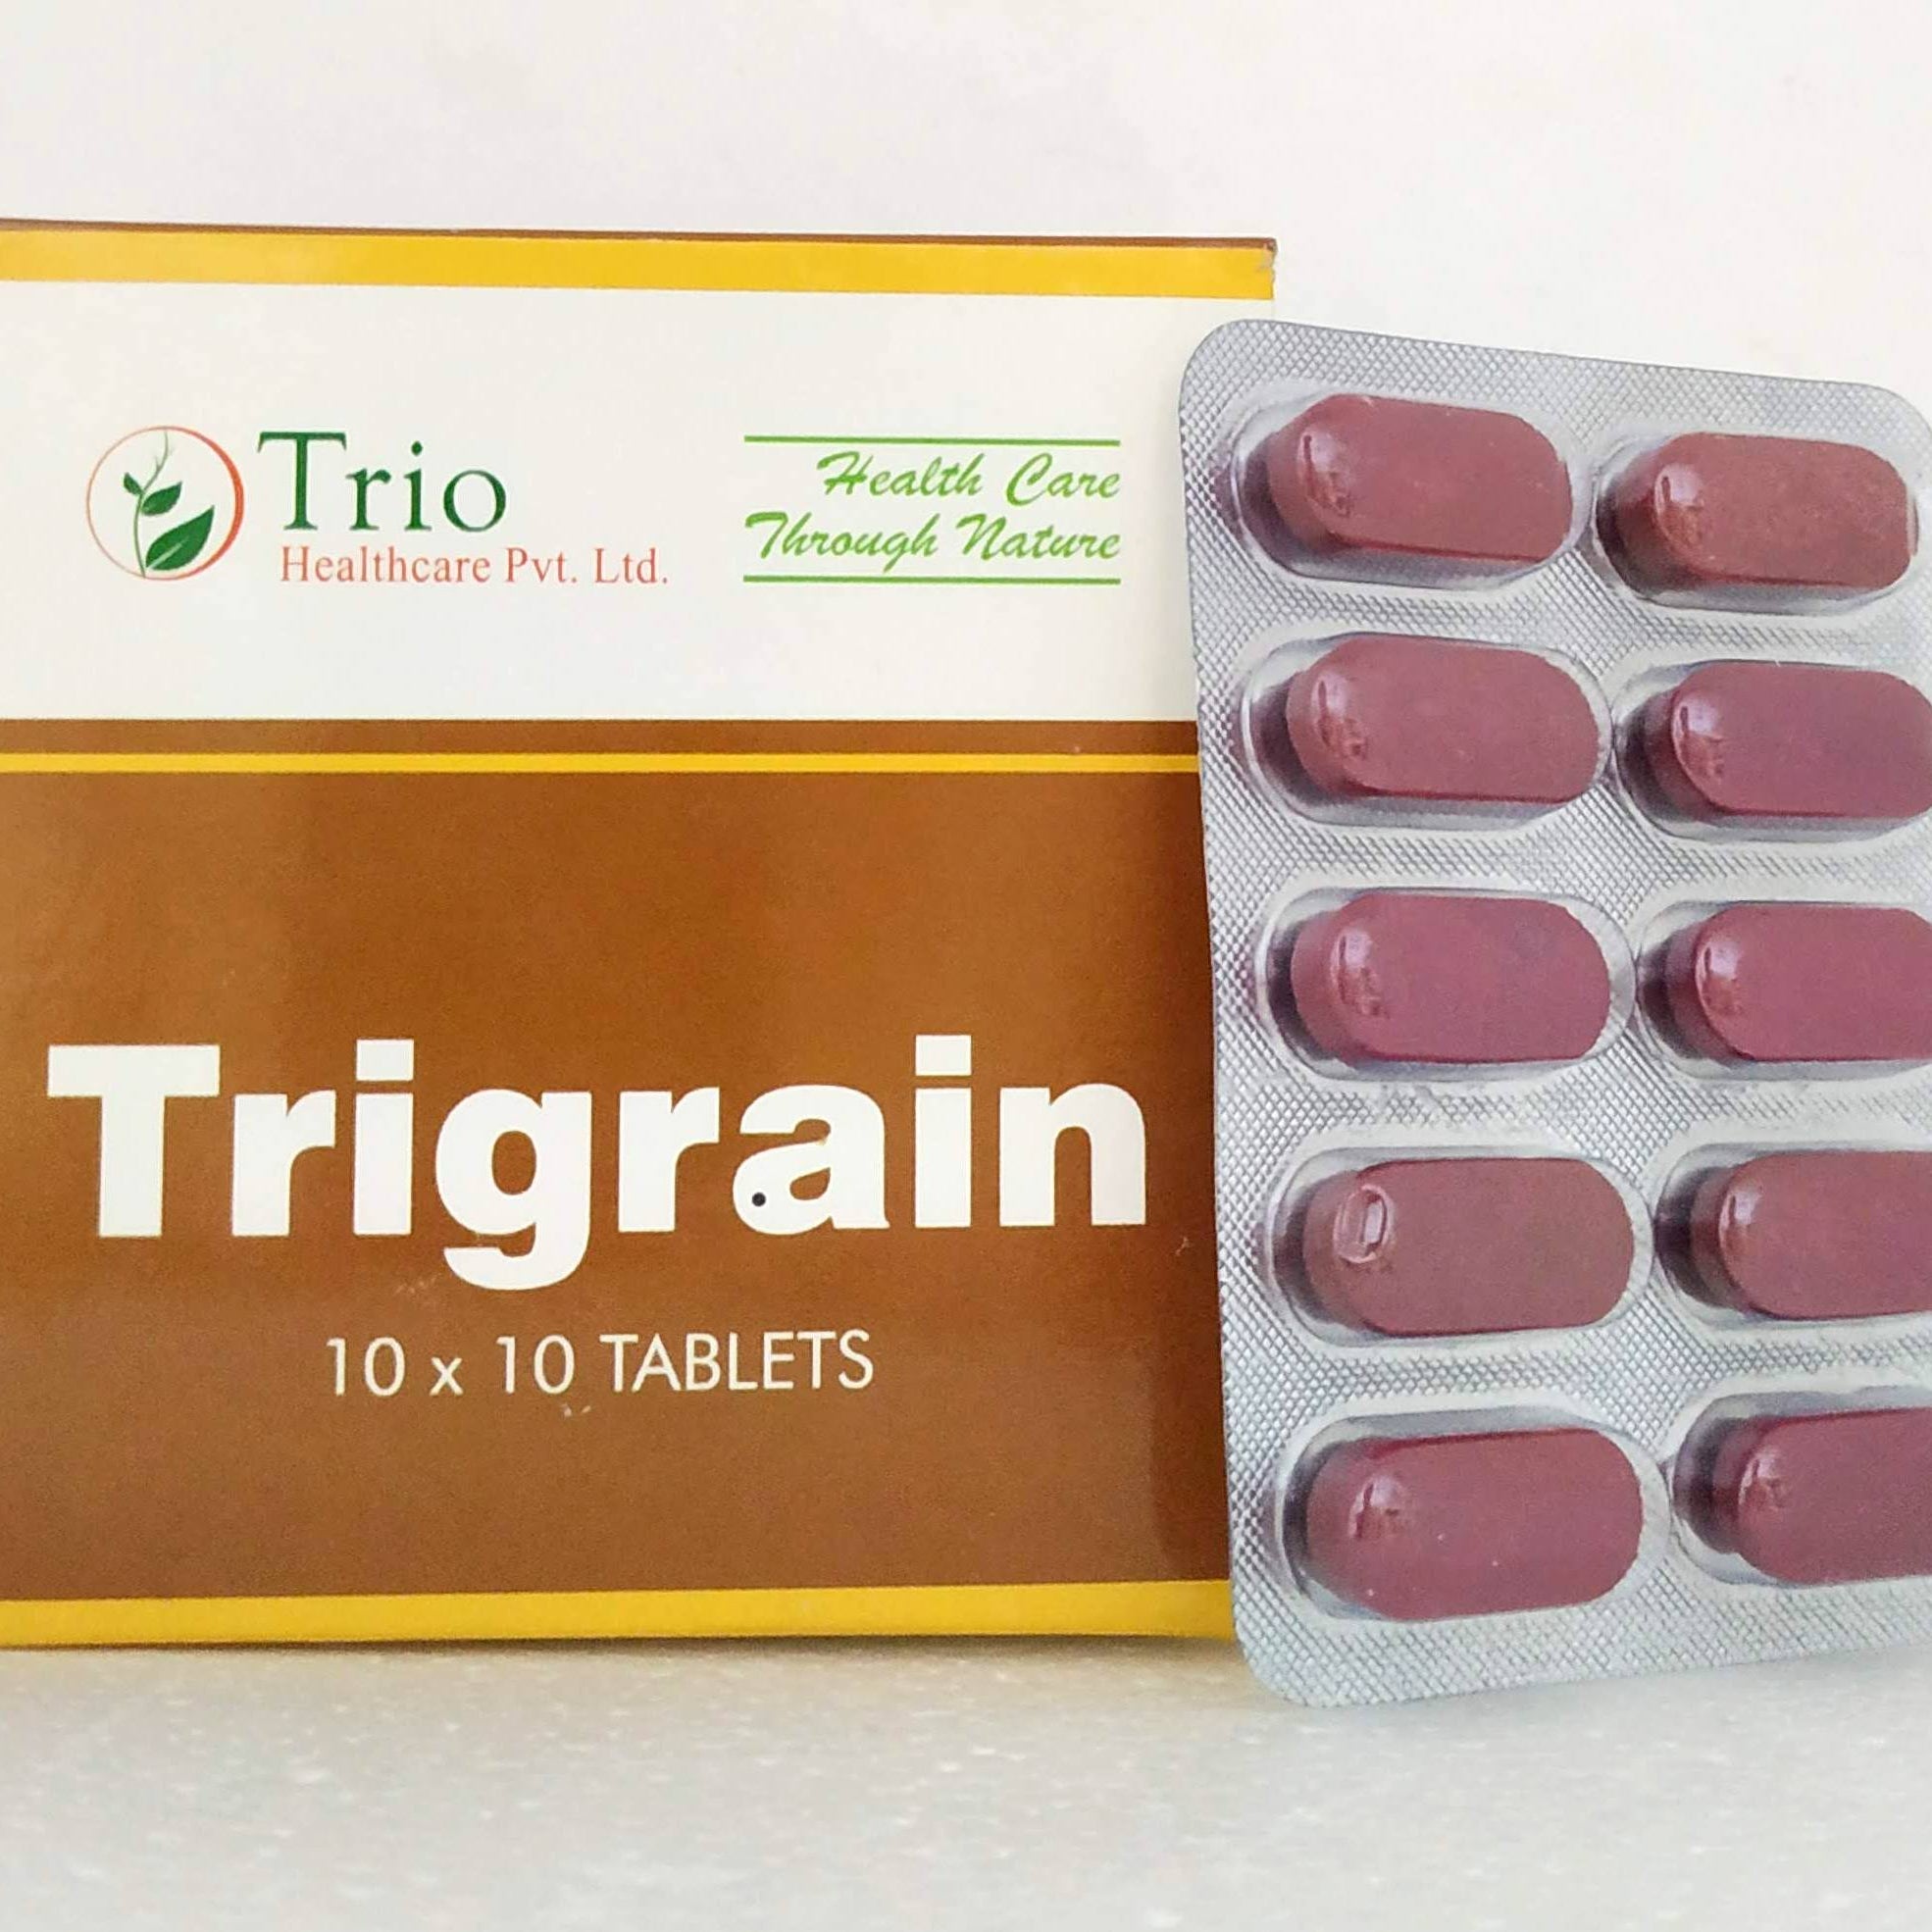 Shop Trigrain tablets - 10tablets at price 66.00 from Trio Online - Ayush Care